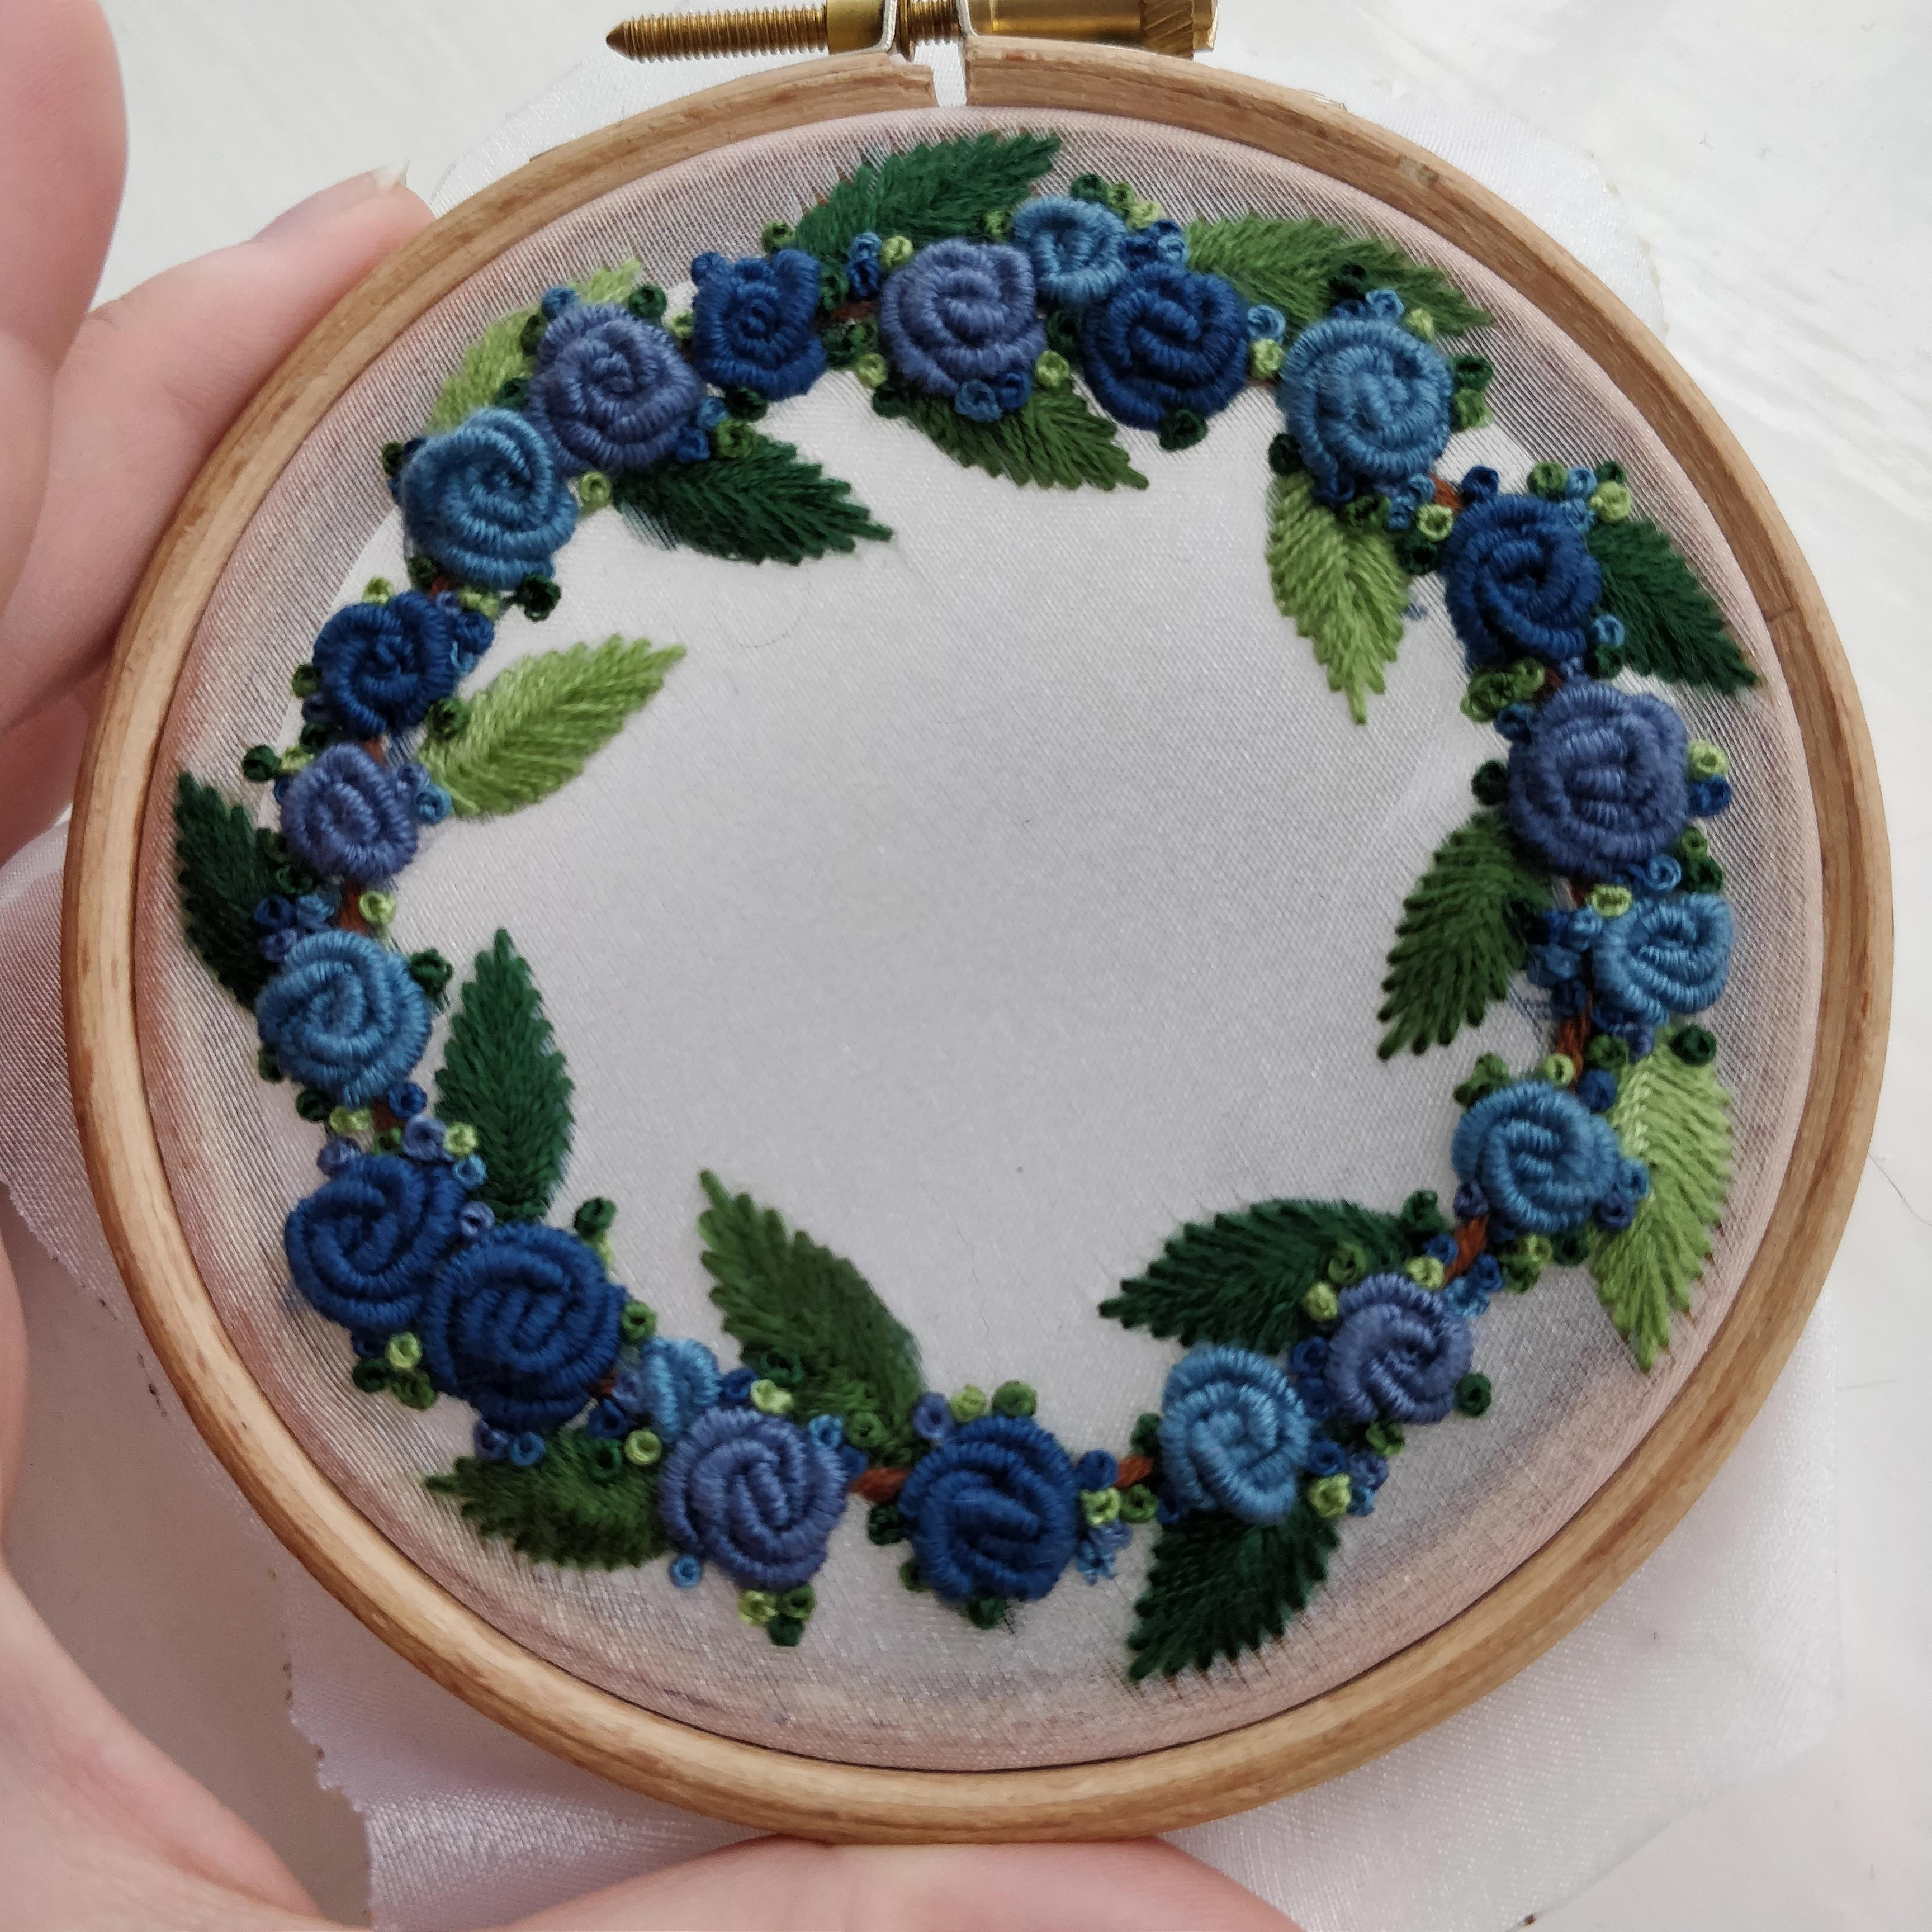 French Knots Embroidery Patterns A 4 Inch Embroidered Organza Hoop Featuring Bullion Knots French